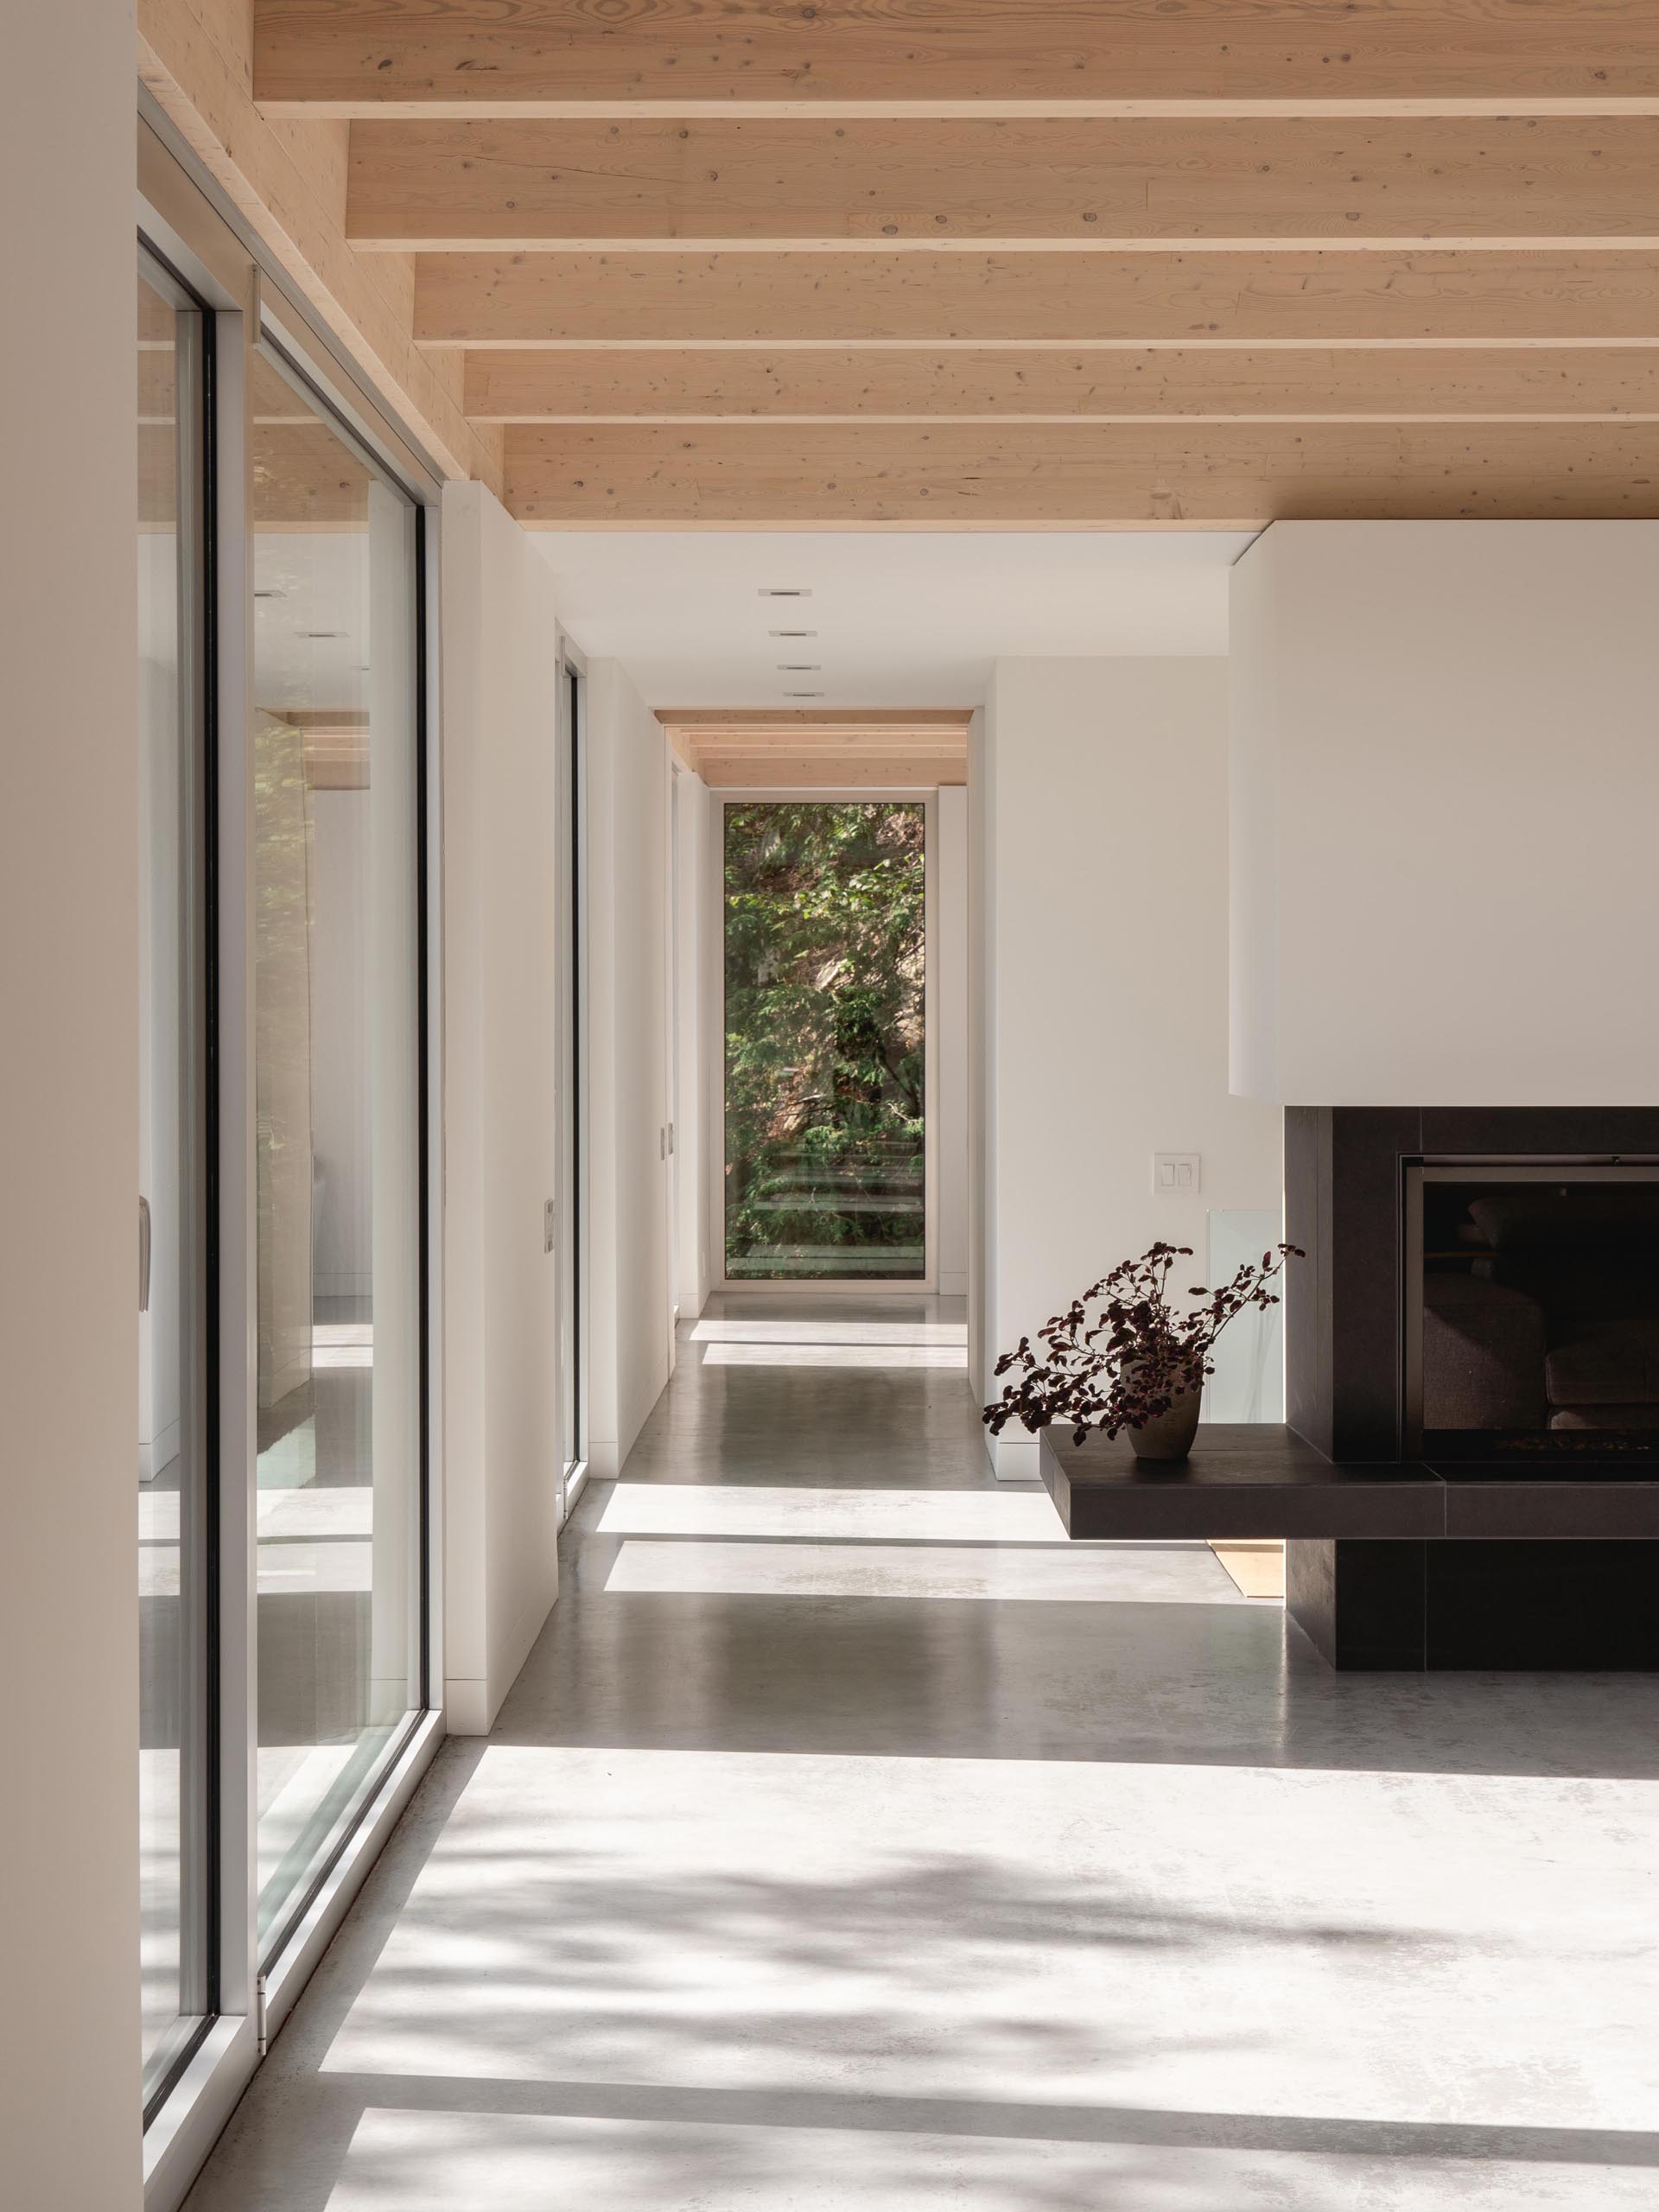 Polished concrete floors, gypsum walls, and the natural aluminum windows blend harmoniously with the wood in this modern home.